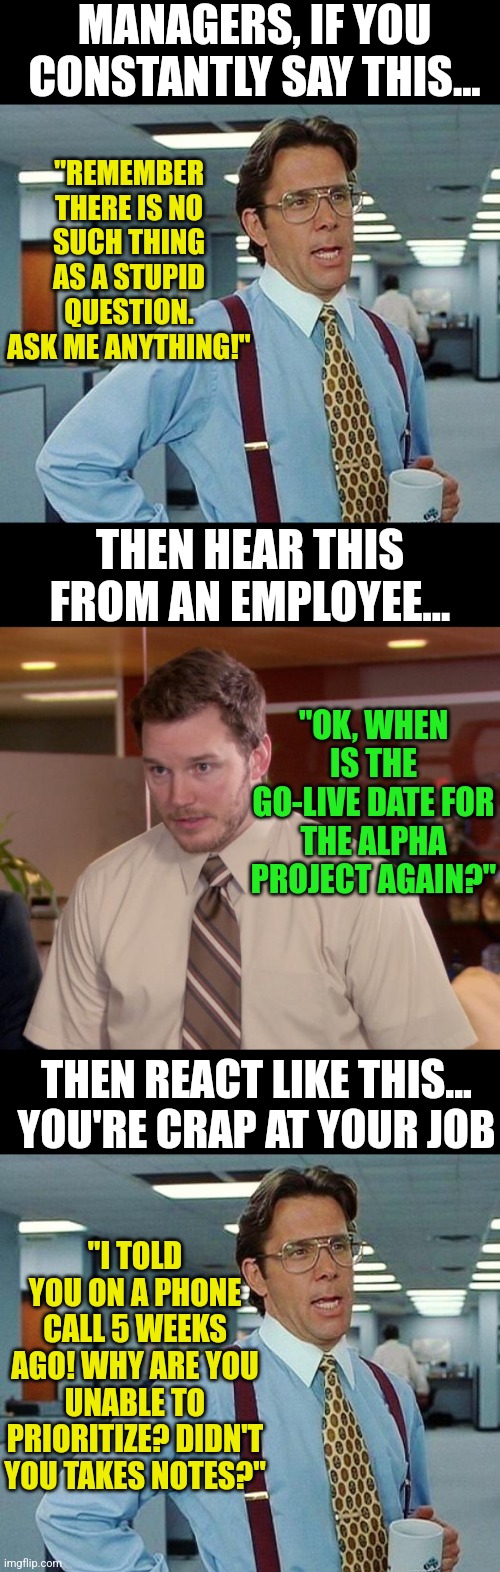 Managers, if you don't STOP doing this, your employees will hate you! It's ok to answer the same question twice in a year. | MANAGERS, IF YOU CONSTANTLY SAY THIS... "REMEMBER THERE IS NO SUCH THING AS A STUPID QUESTION. ASK ME ANYTHING!"; THEN HEAR THIS FROM AN EMPLOYEE... "OK, WHEN IS THE GO-LIVE DATE FOR THE ALPHA PROJECT AGAIN?"; THEN REACT LIKE THIS... YOU'RE CRAP AT YOUR JOB; "I TOLD YOU ON A PHONE CALL 5 WEEKS AGO! WHY ARE YOU UNABLE TO PRIORITIZE? DIDN'T YOU TAKES NOTES?" | image tagged in lumbergh,afraid to ask andy,boss,questions,scumbag boss,bullying | made w/ Imgflip meme maker